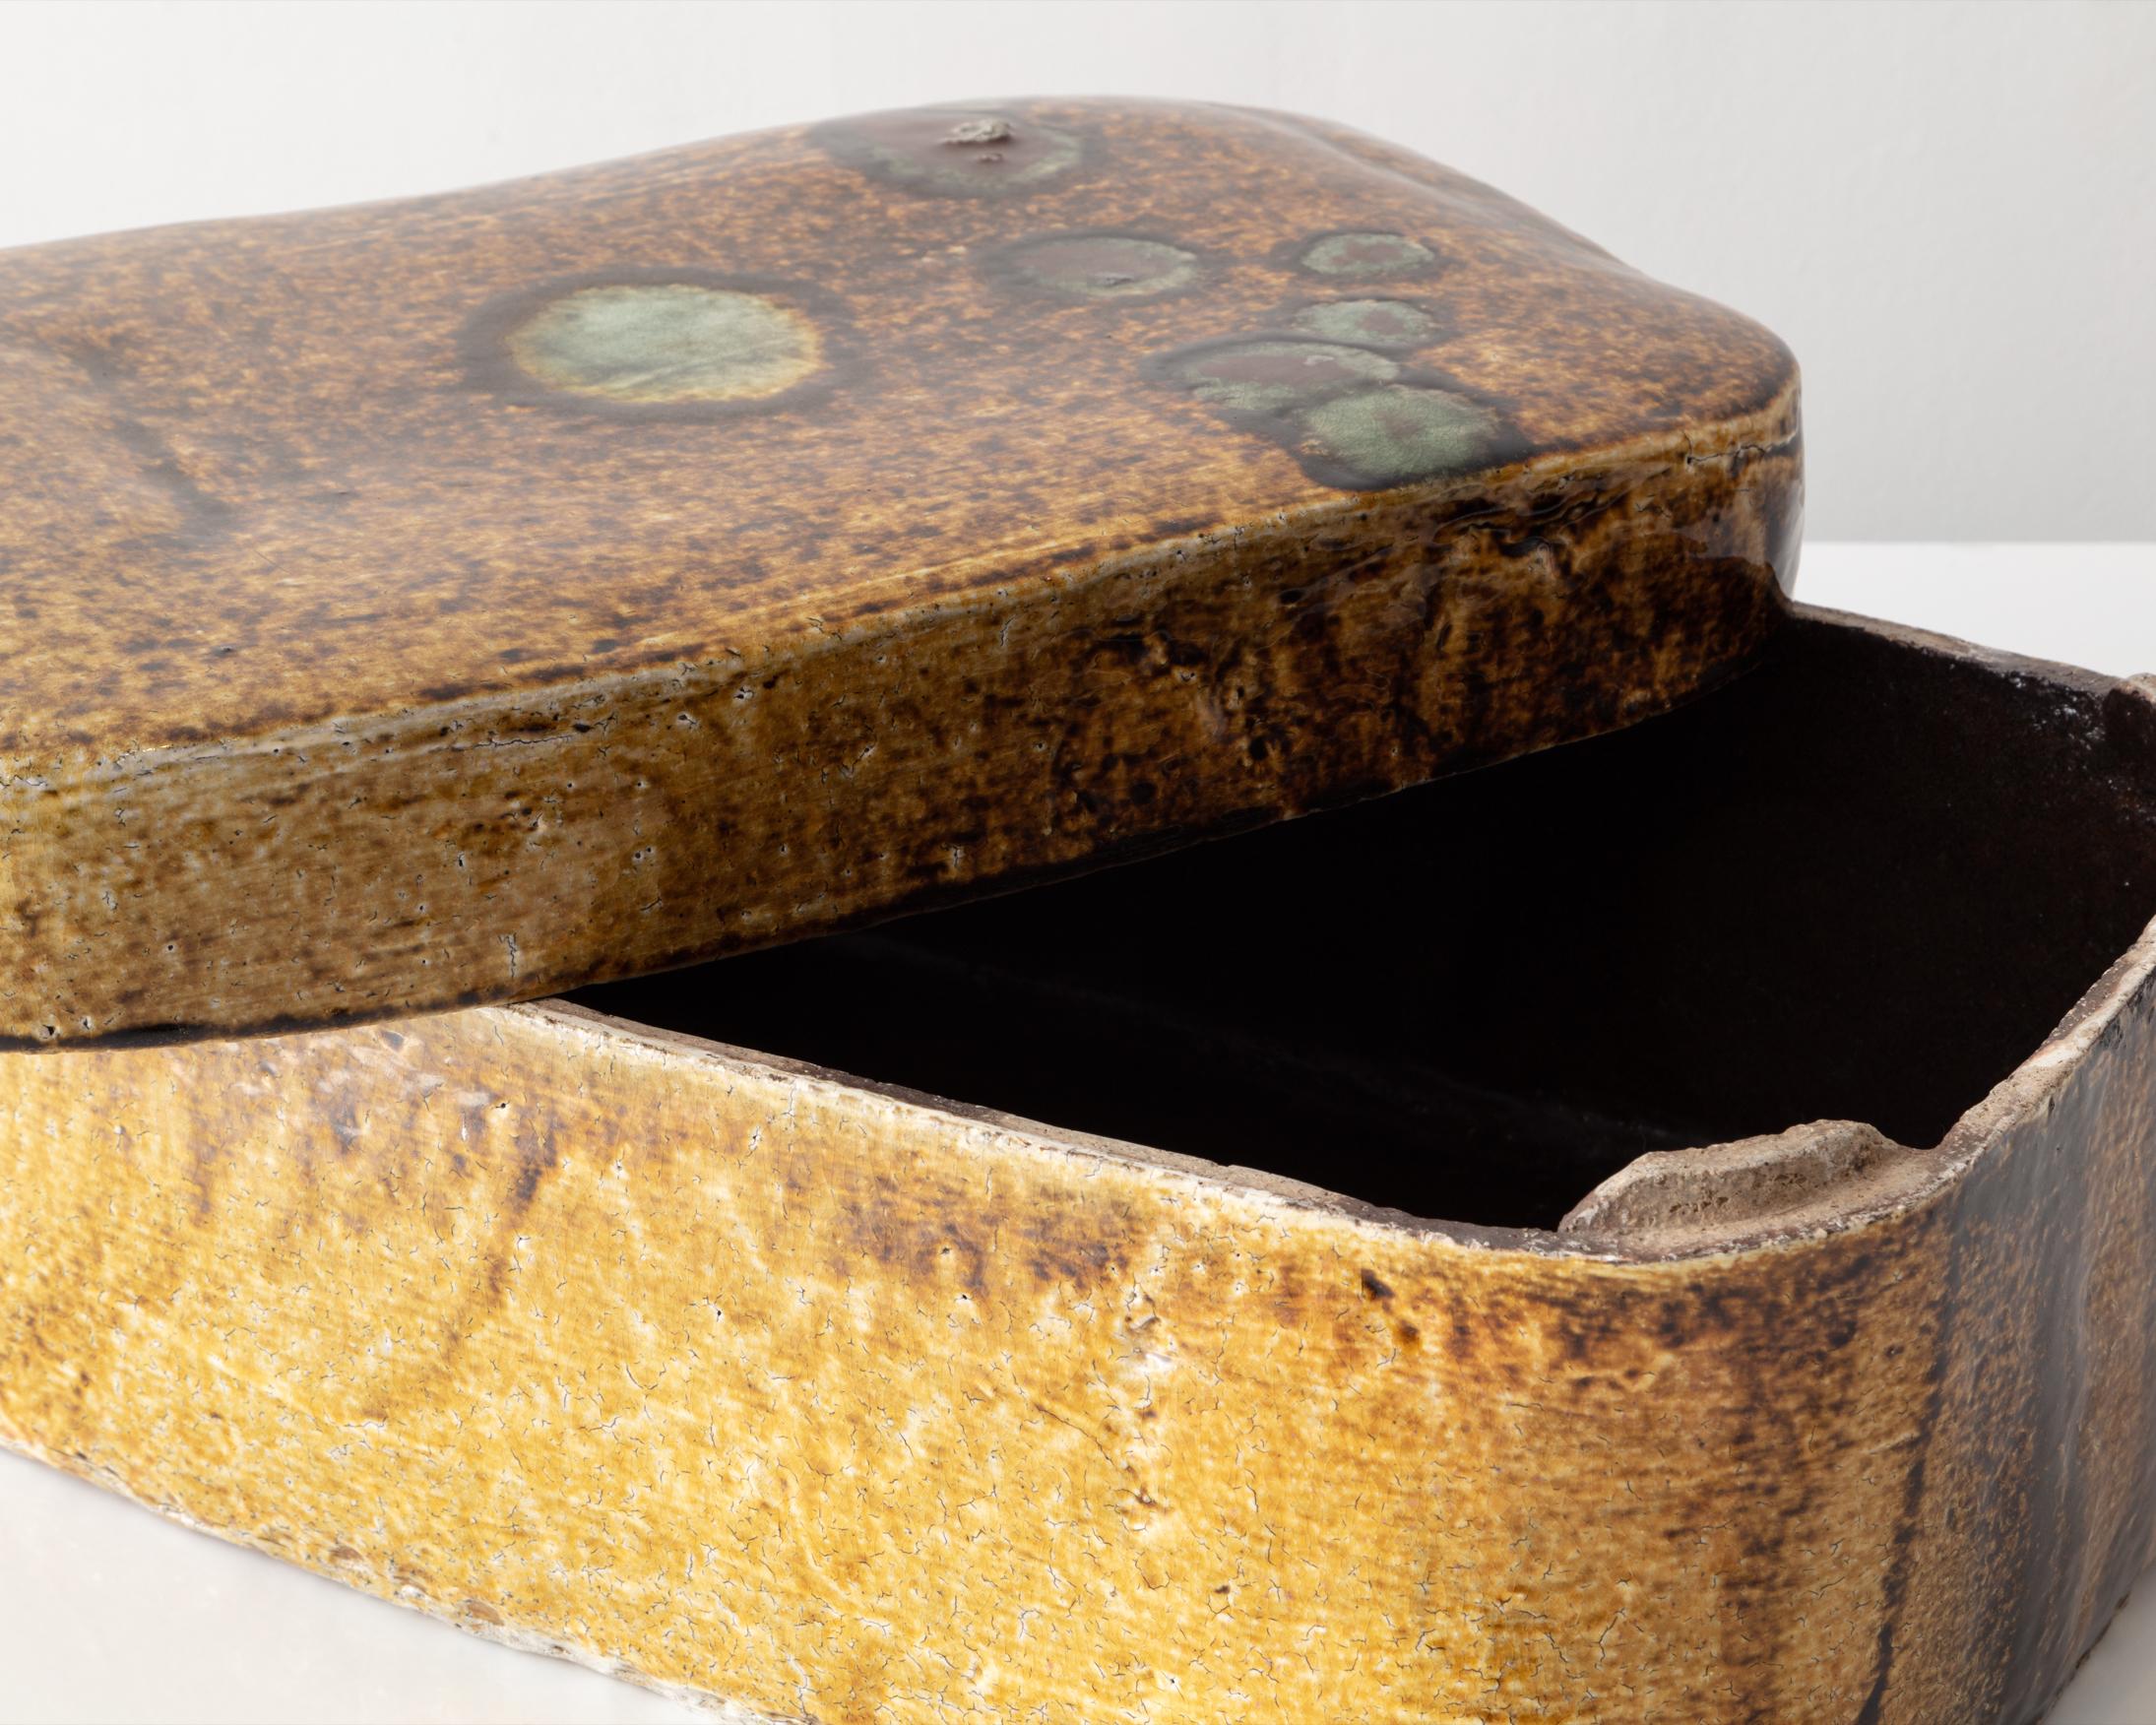 Golden brown large rectangular ceramic box with a spotted lid, glazed ceramic. Designed and made by Hun-Chung Lee, Korea, 2011.
 